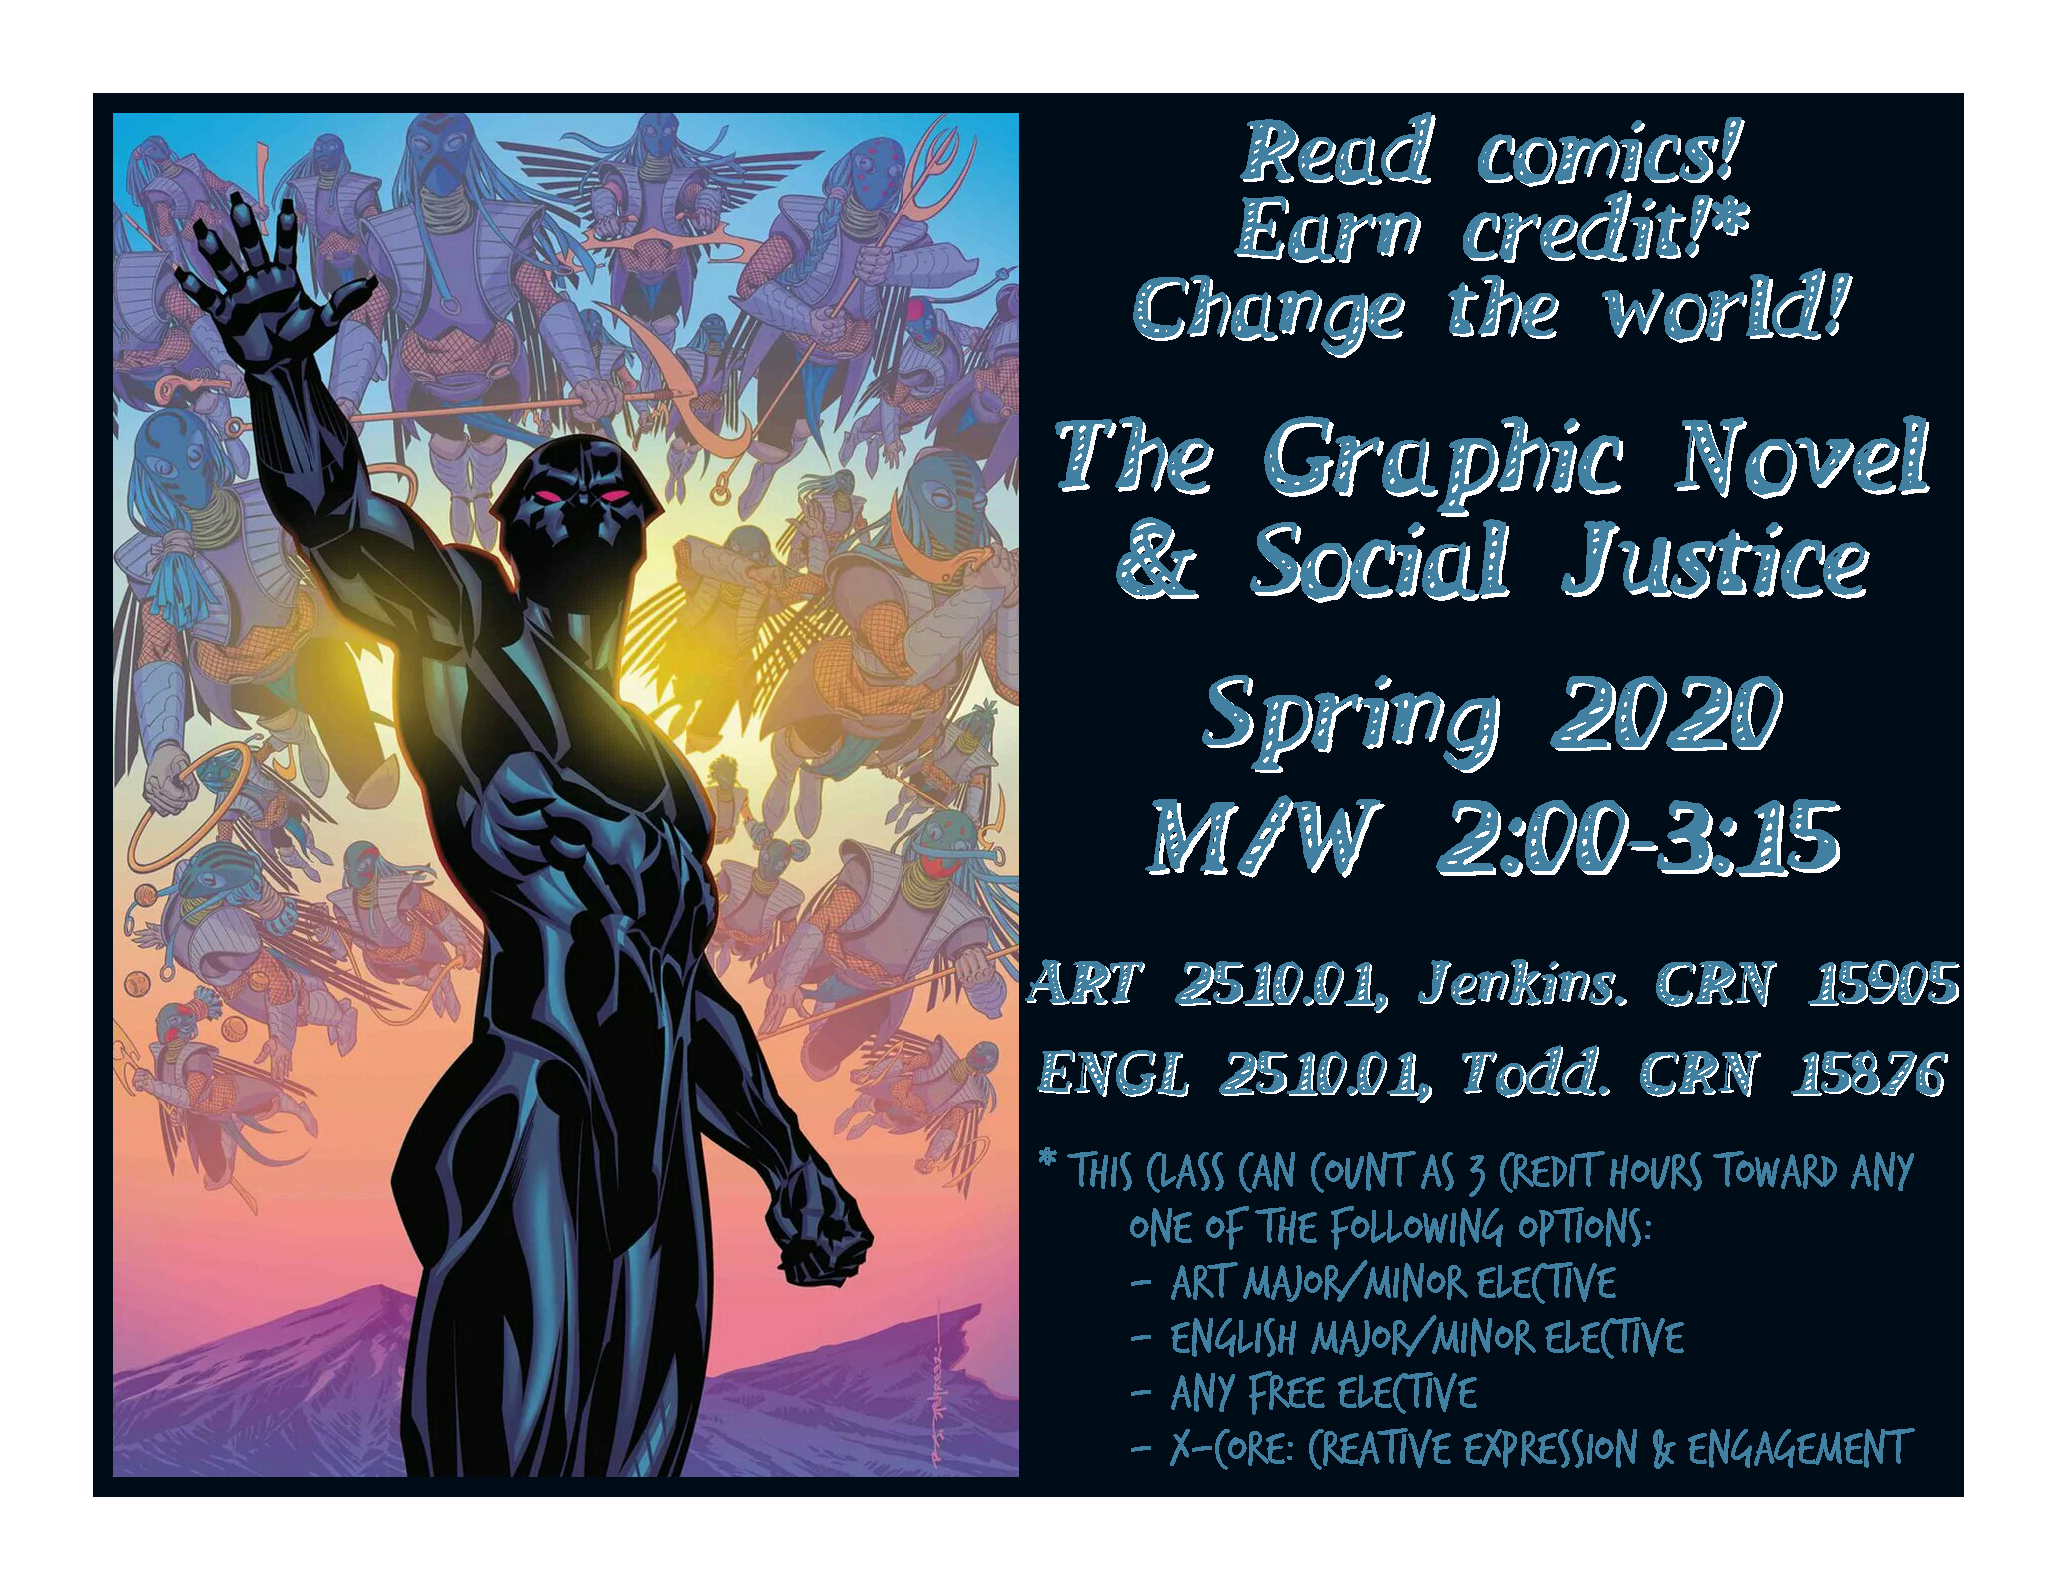 Poster promoting the Spring 2020 section of the class with information and images about the graphic novels that would be read